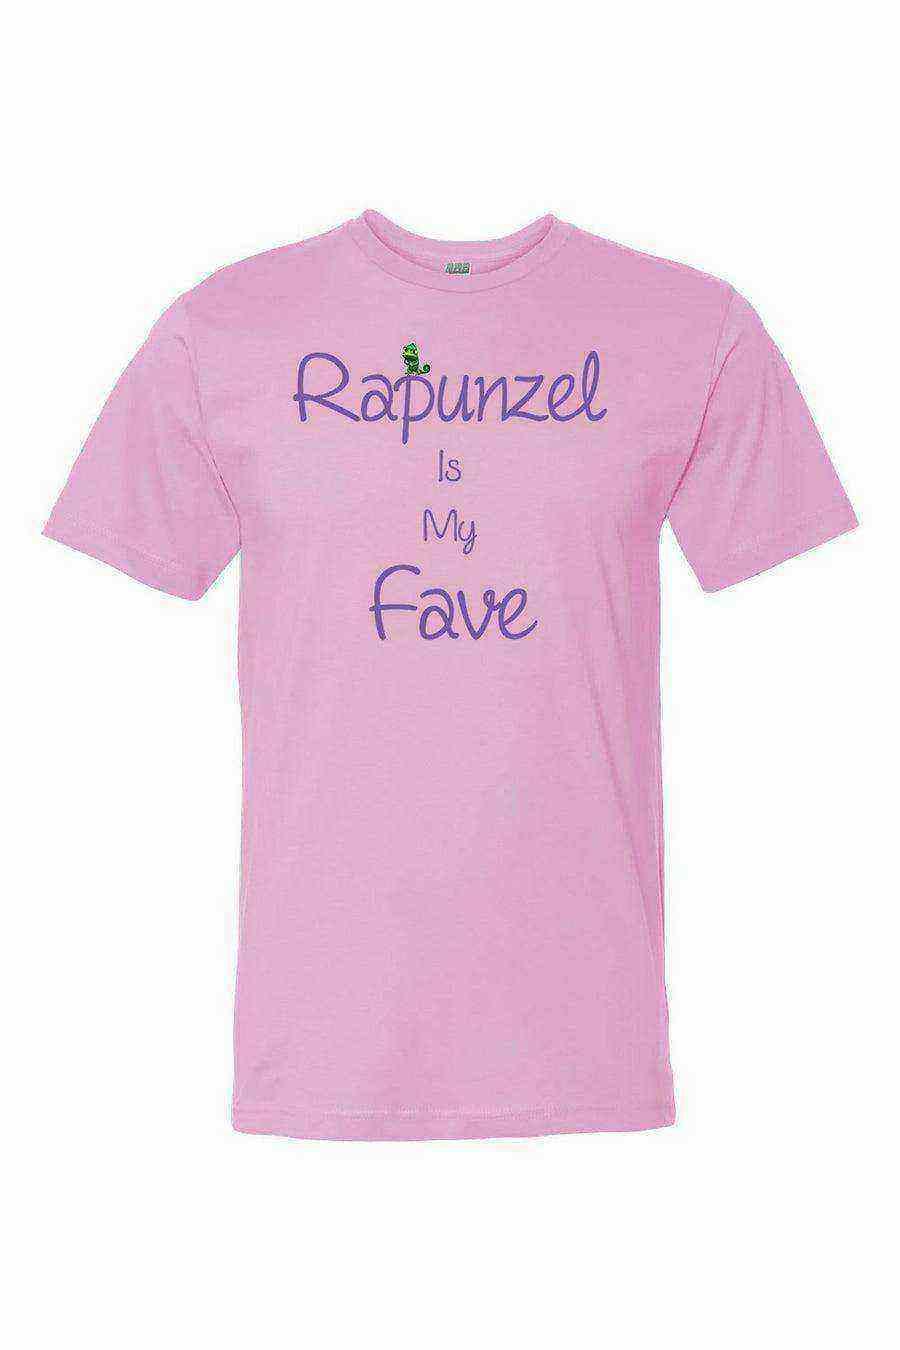 Rapunzel is my Fave Shirt - Dylan's Tees